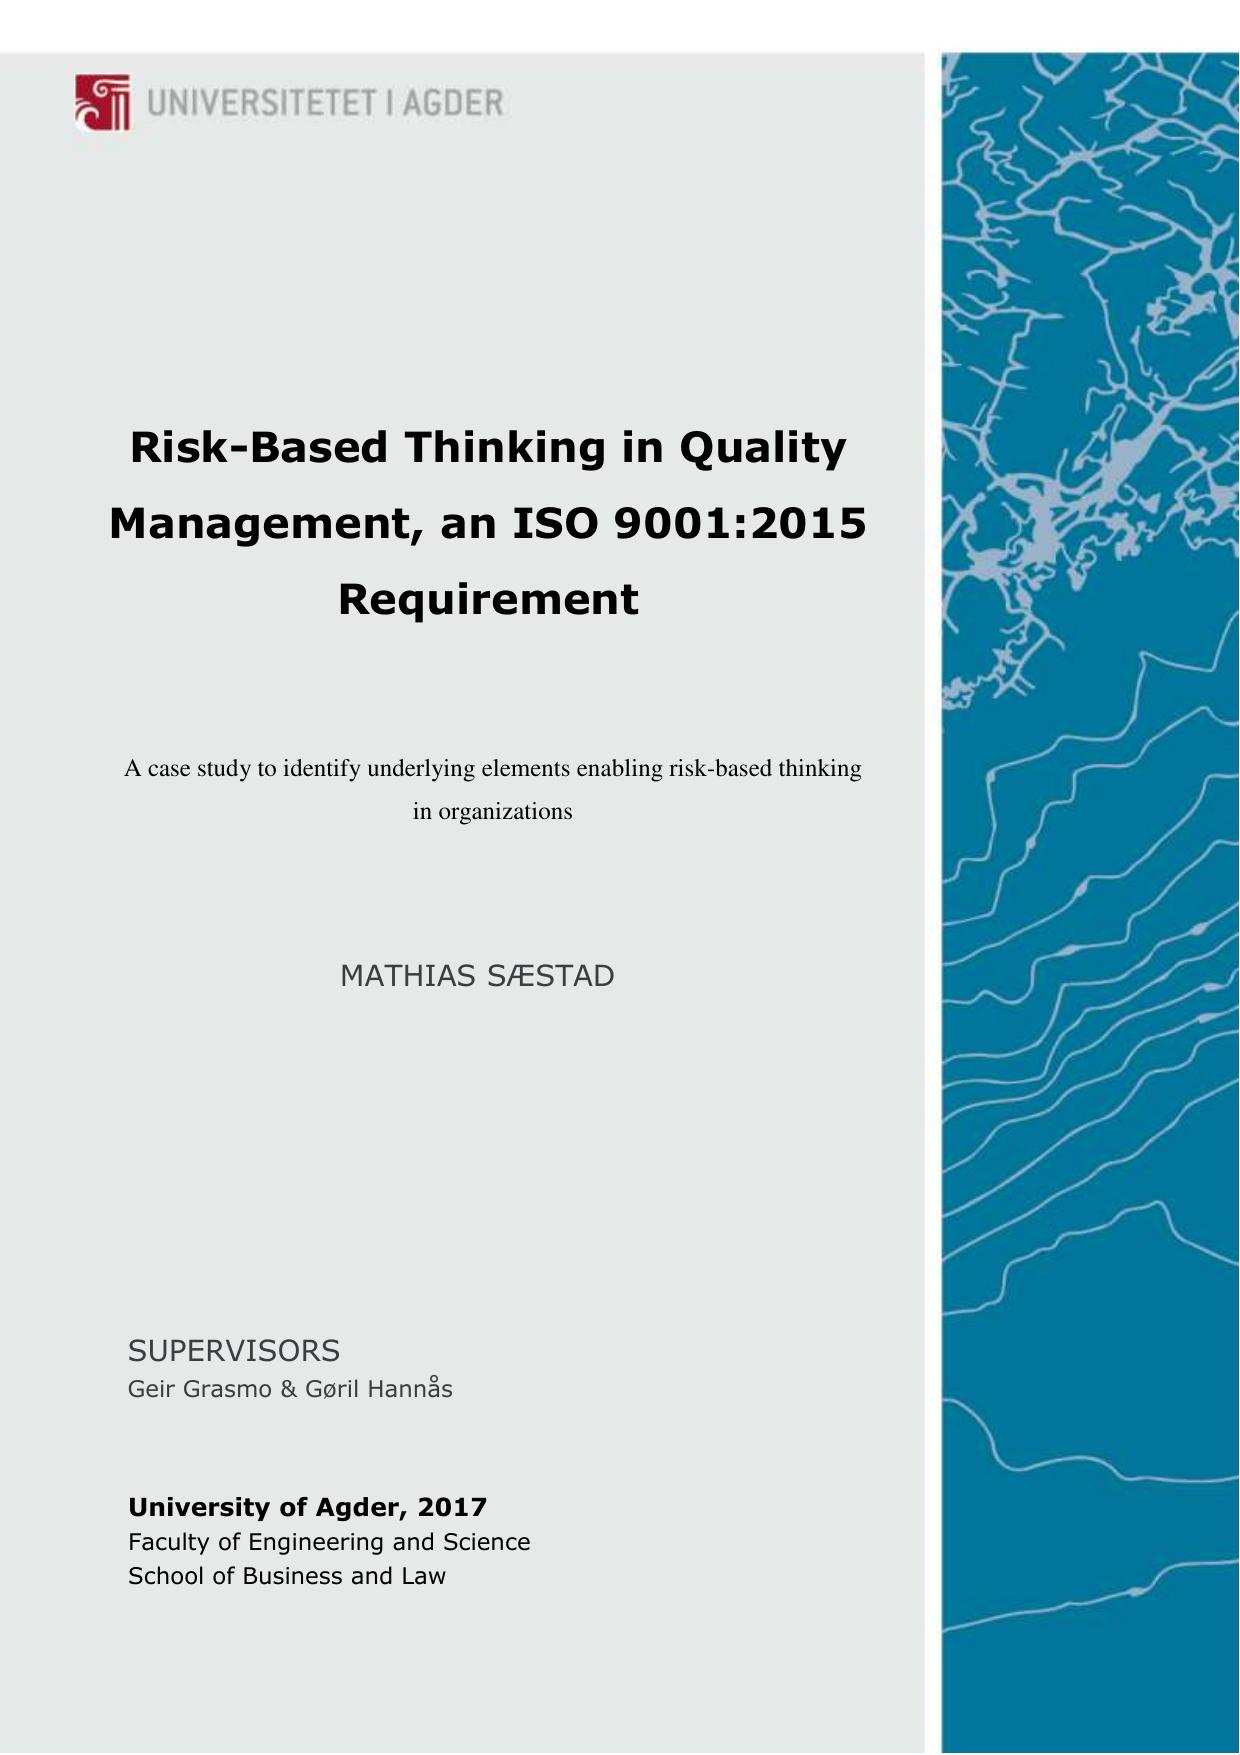 Risk-Based Thinking in Quality Management, an ISO 9001 2015 Requirement 2017